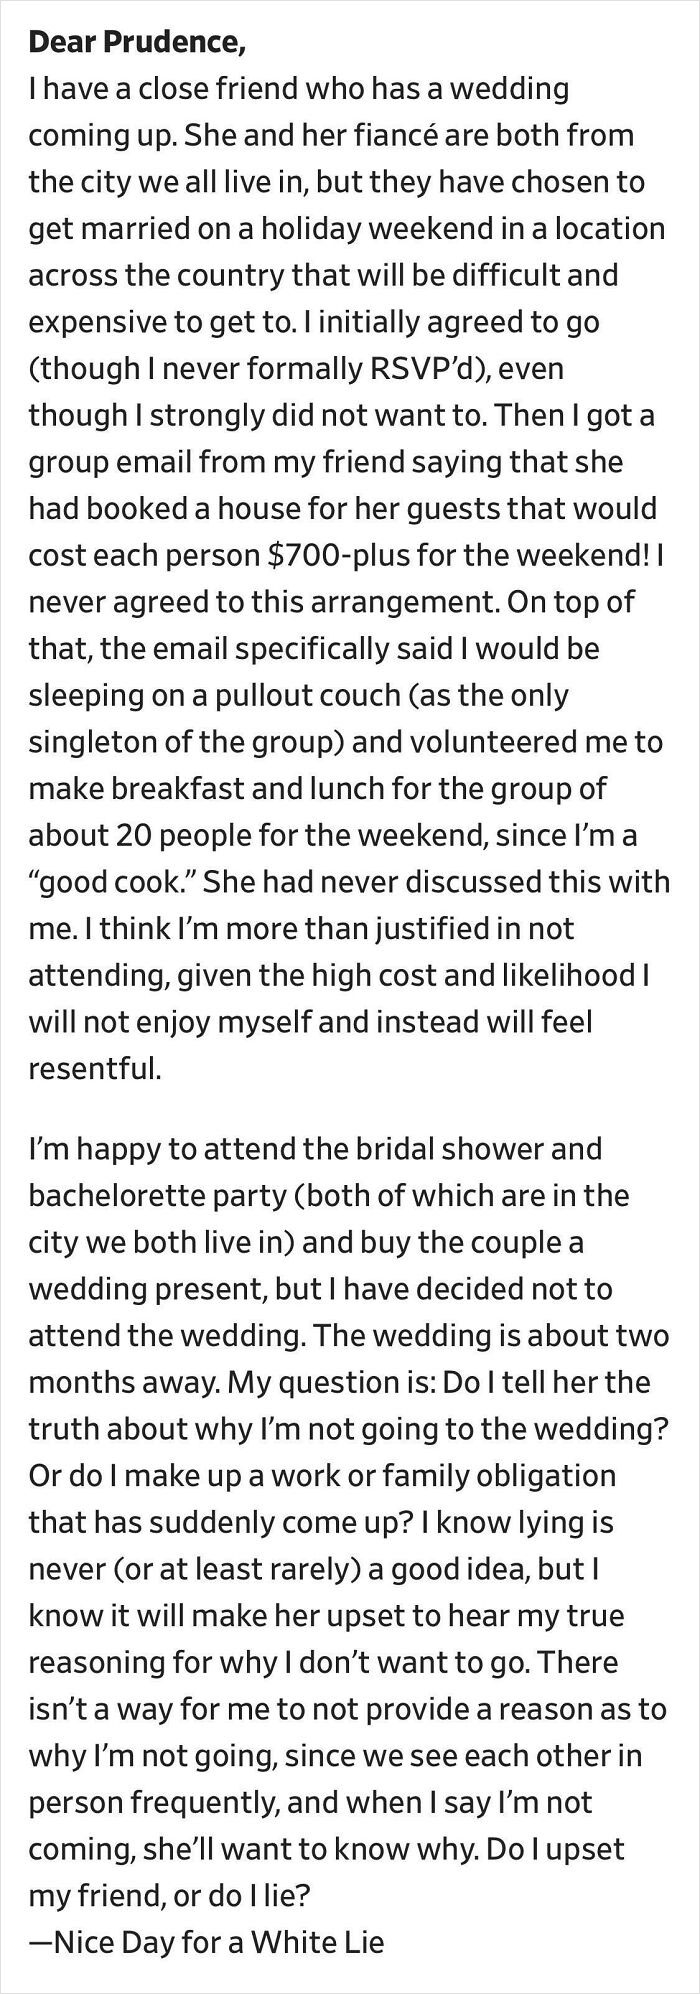 Come To Our Wedding And Pay $700 To Stay In The Guest House But You’ll Be Sleeping On The Pullout Couch Because You’re The Only Singleton. Also, Did I Mention You’re Cooking For Everyone?